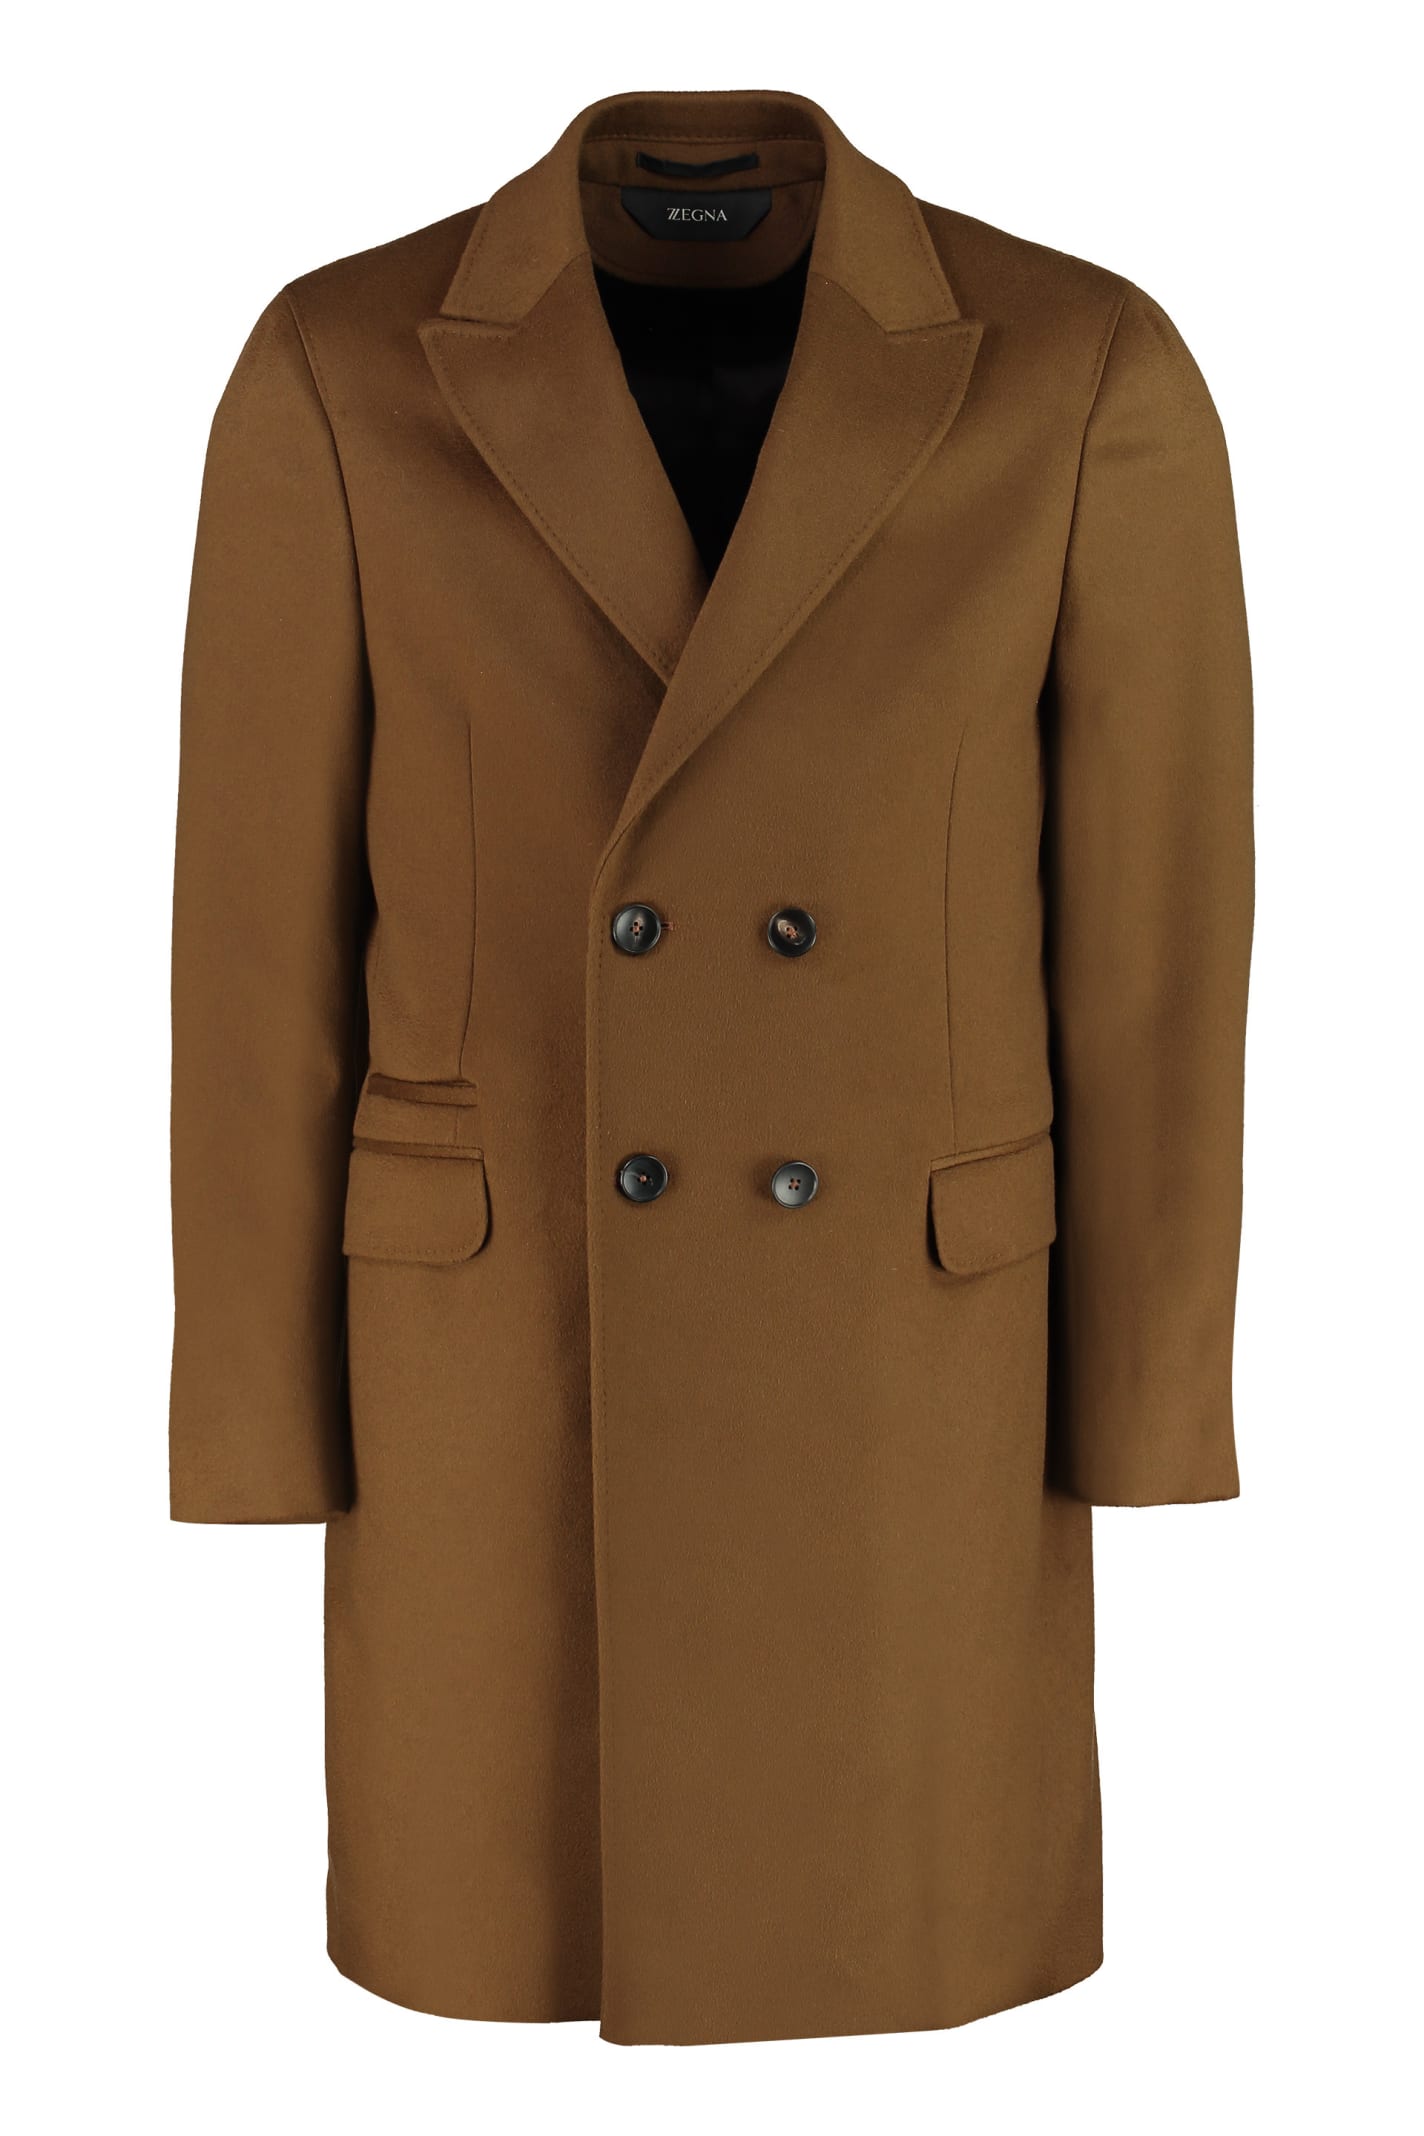 Z Zegna Wool And Cashmere Coat